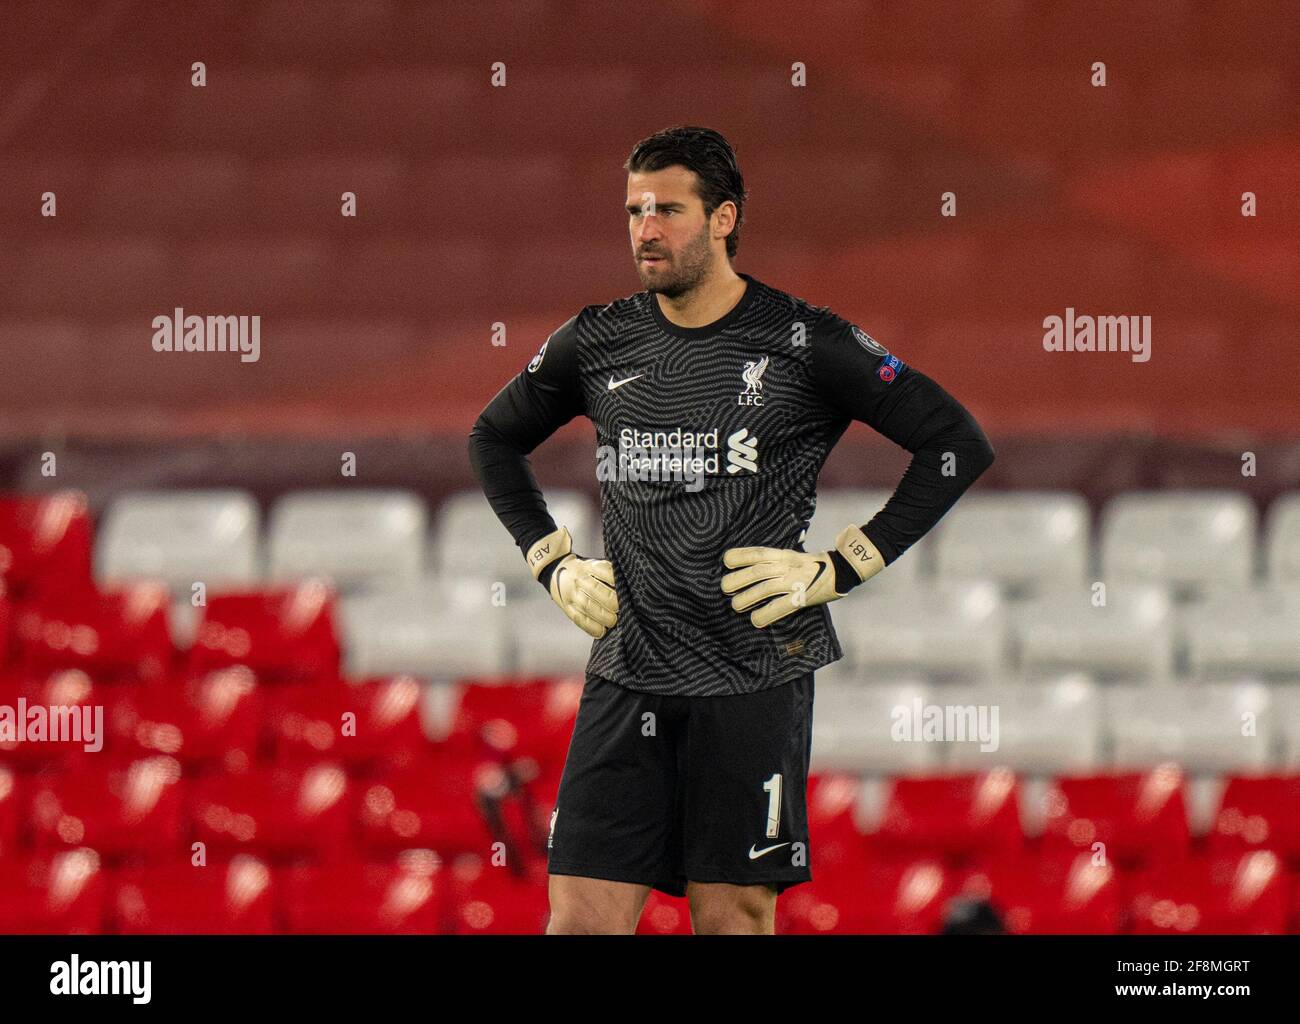 Liverpool. 15th Apr, 2021. Liverpool's goalkeeper Alisson Becker looks  dejected during the UEFA Champions League quarterfinal 2nd Leg match  between Liverpool and Real Madrid at Anfield in Liverpool, Britain, on  April 14,